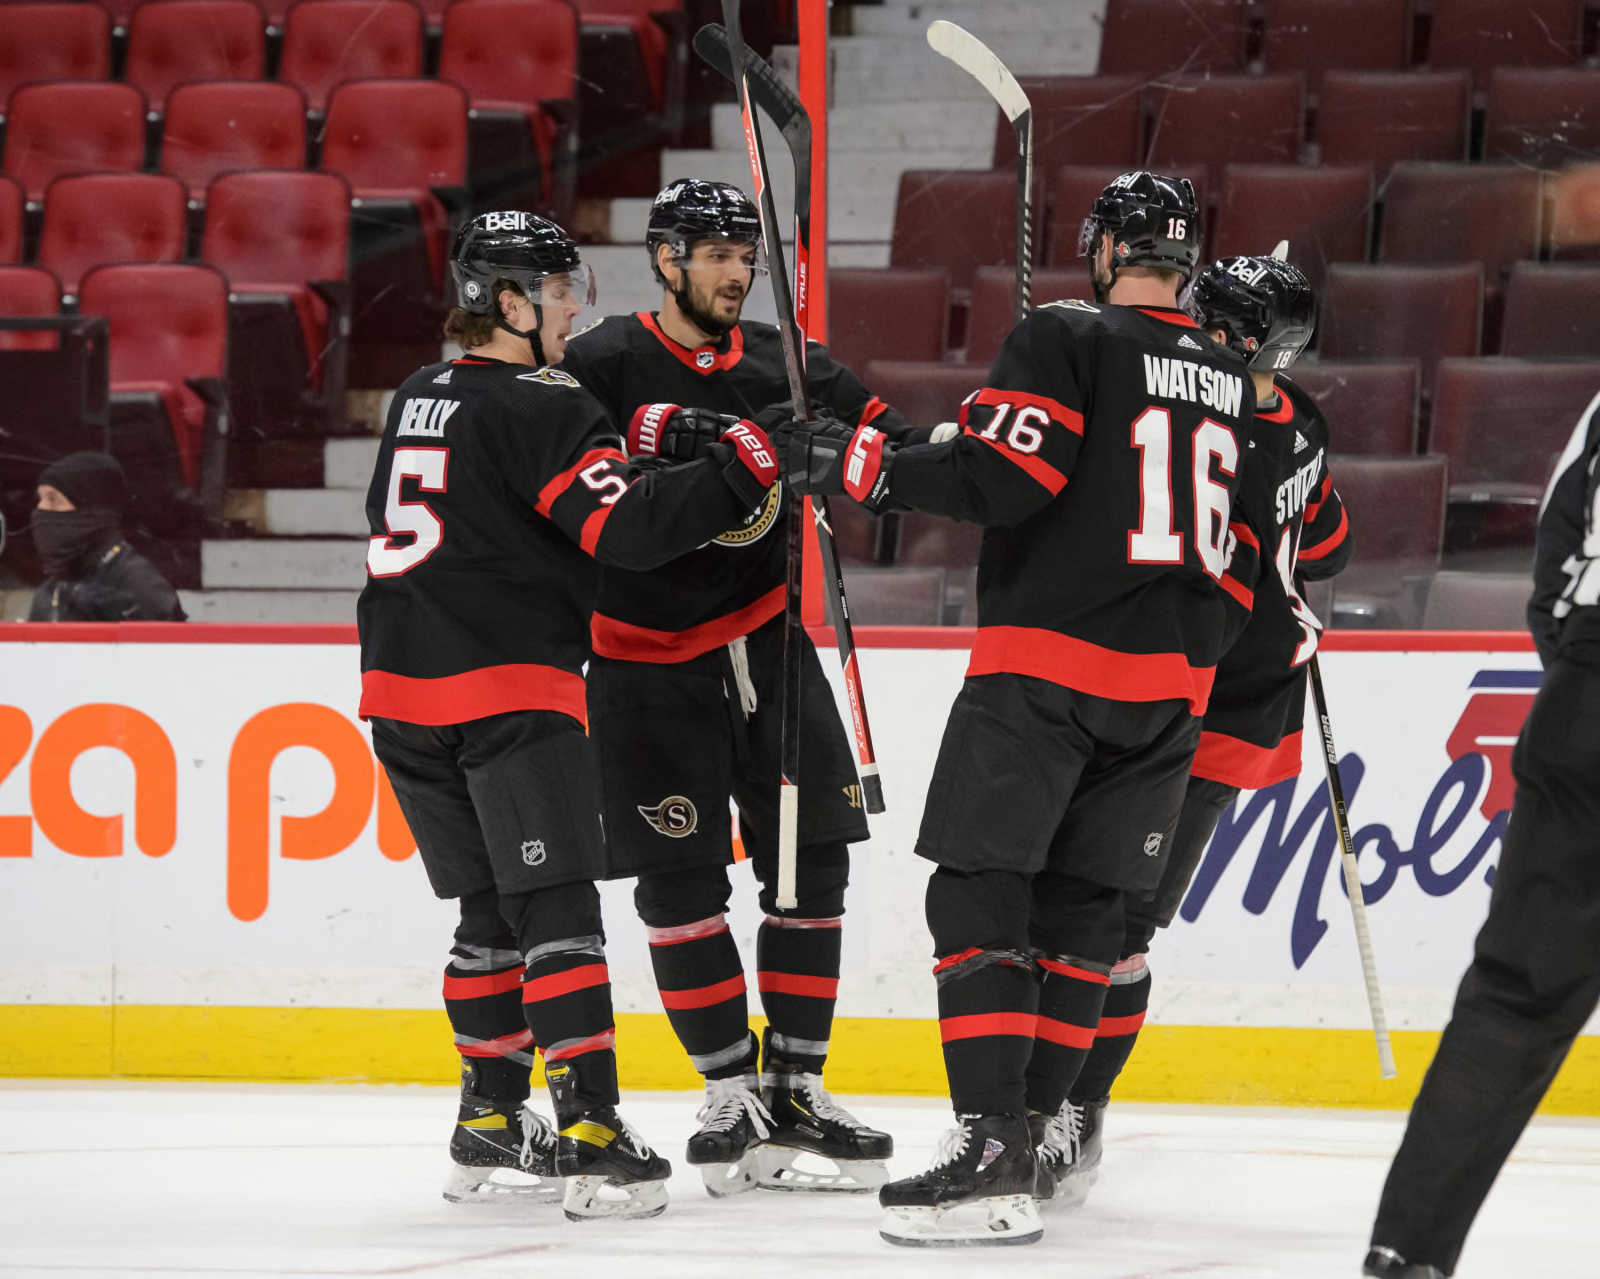 Game Preview #18: New Jersey Devils at Ottawa Senators - All About